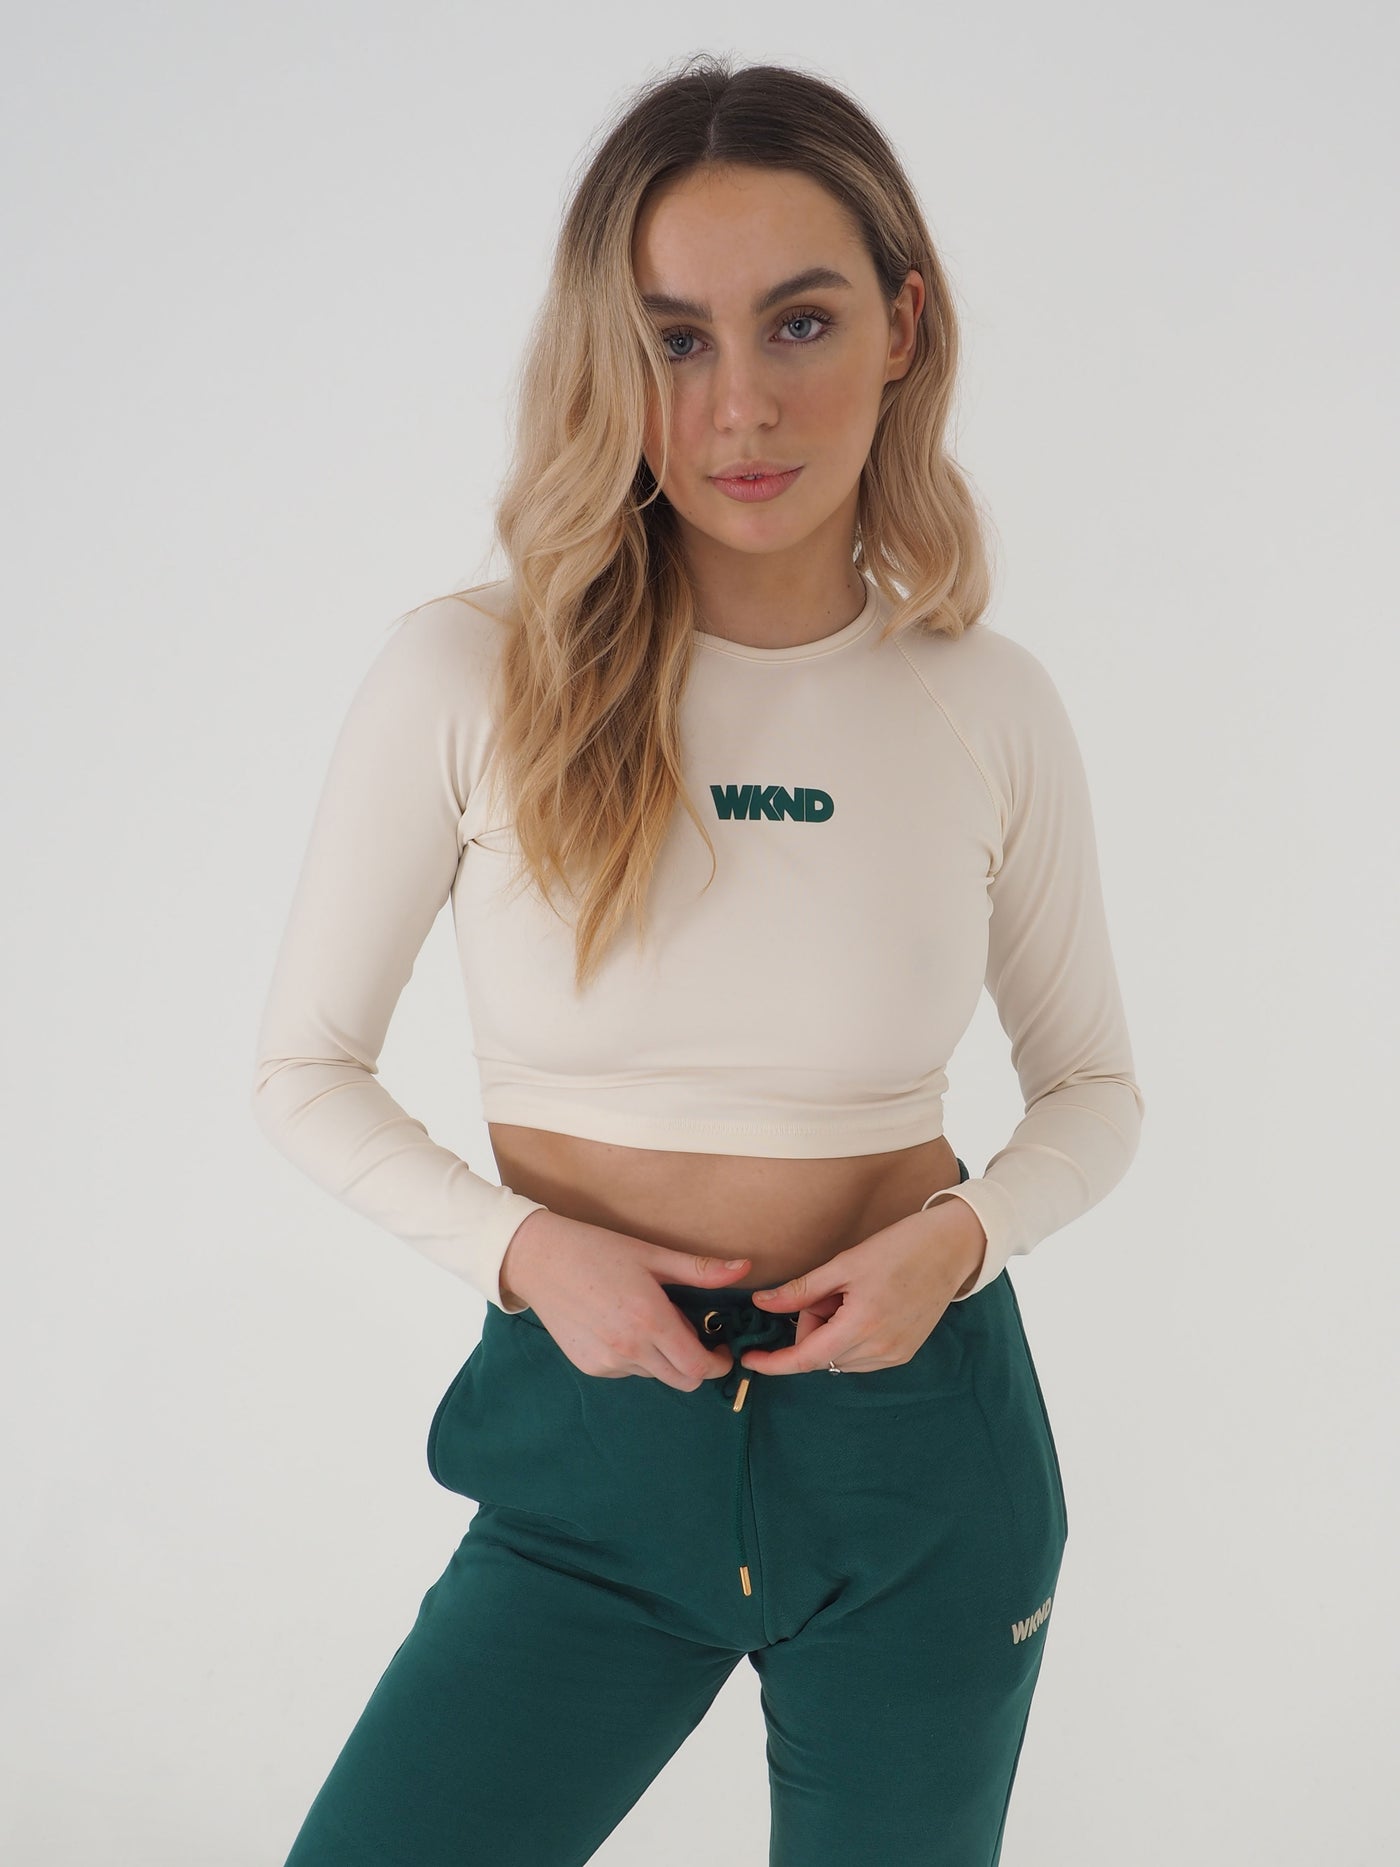 Blonde model is wearing a long sleeve crop top in eggnog cream and matching green joggers.  The WKND logo is green and printed centrally to the chest.